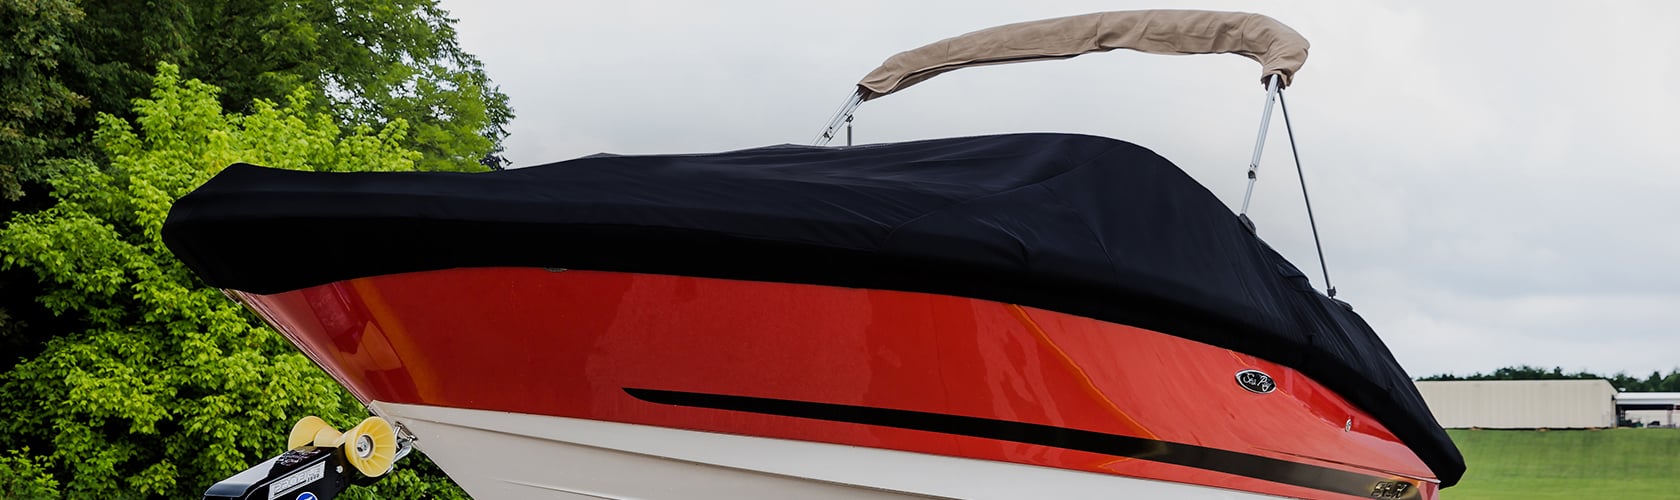 Boat Covers | Overton's